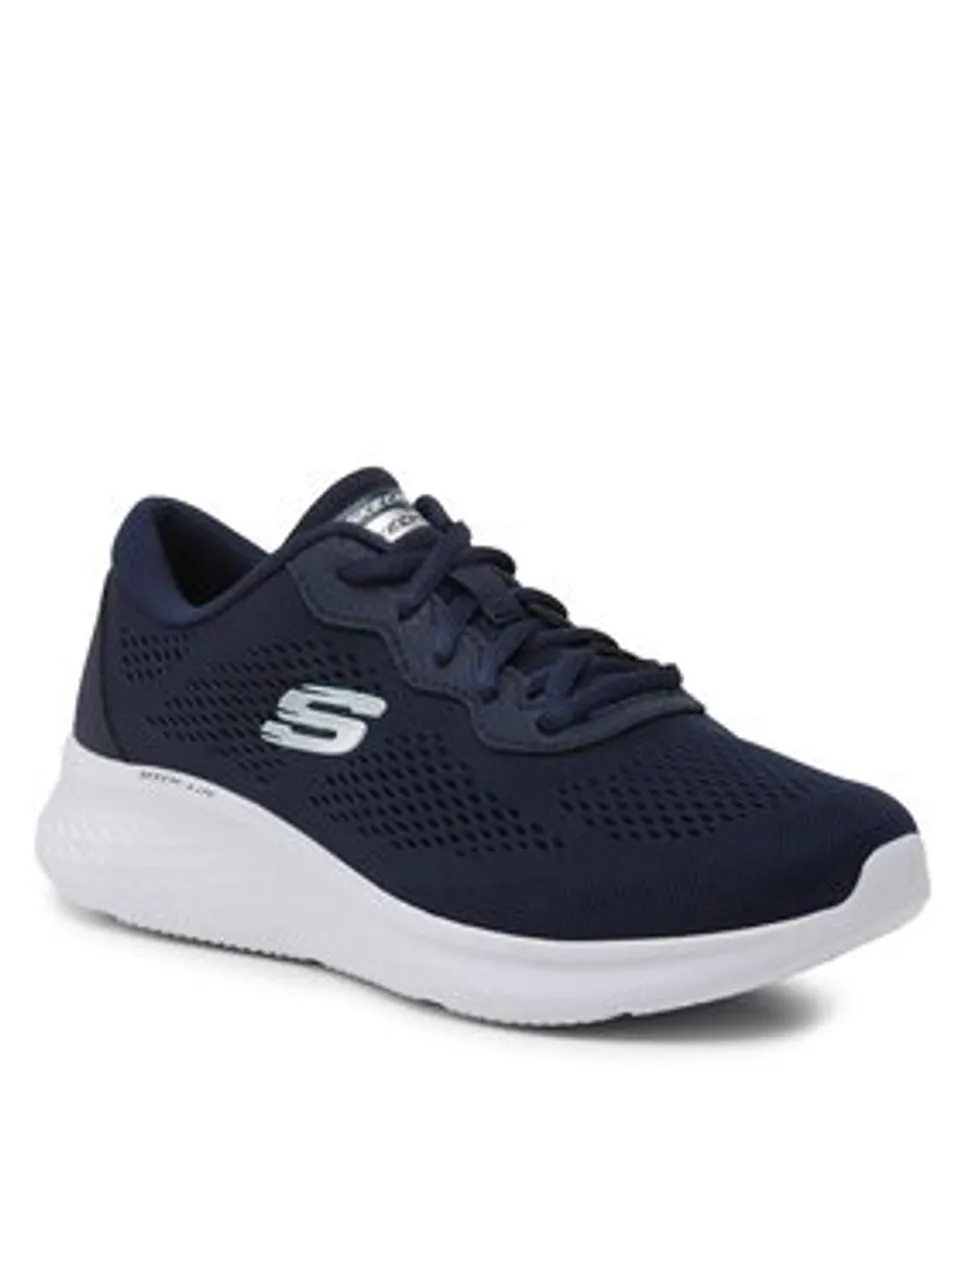 Skechers Sneakers Perfect Time 149991/NVY Dunkelblau